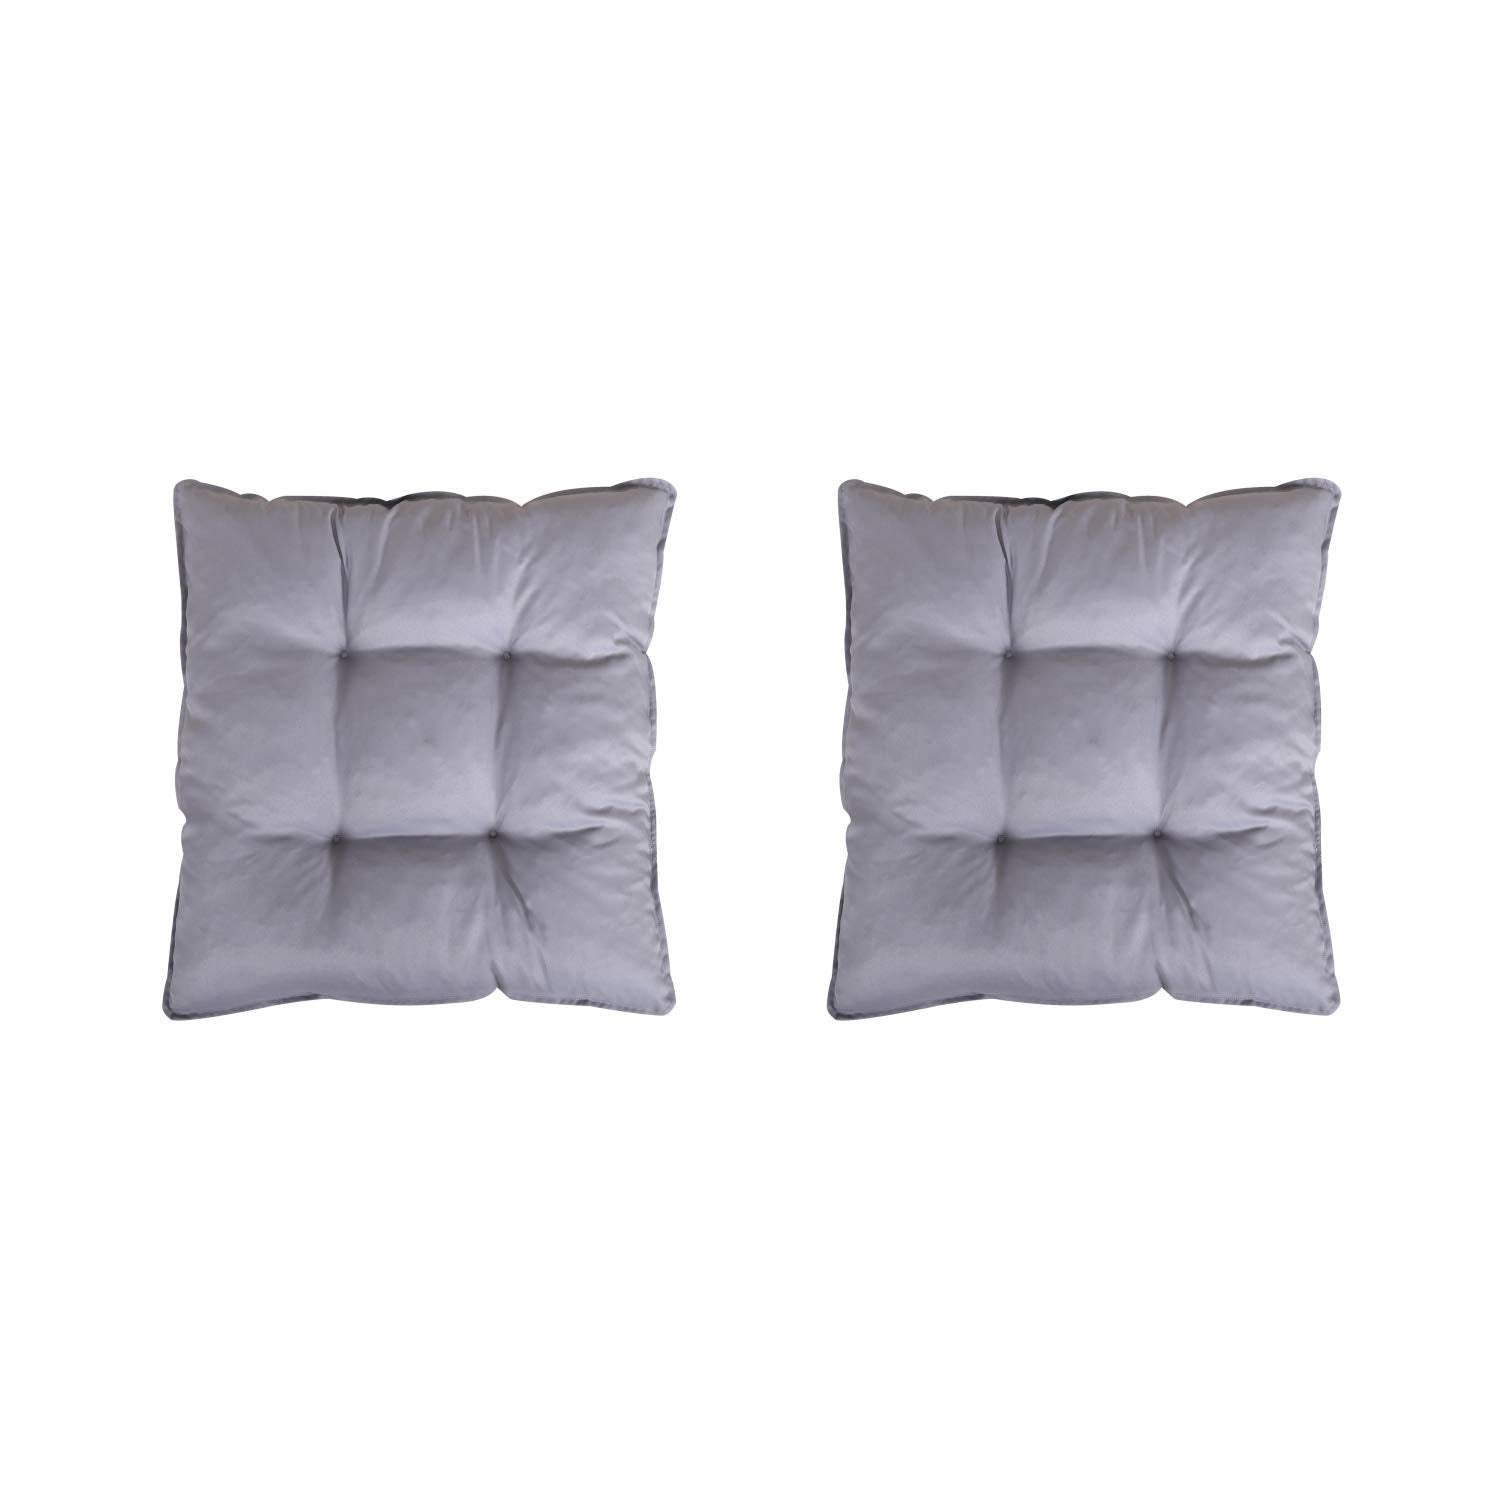 Ambientehome, padded cushions for Garden Furniture. Set of 2 pieces. Color: grey approx. 60x60x10 cm